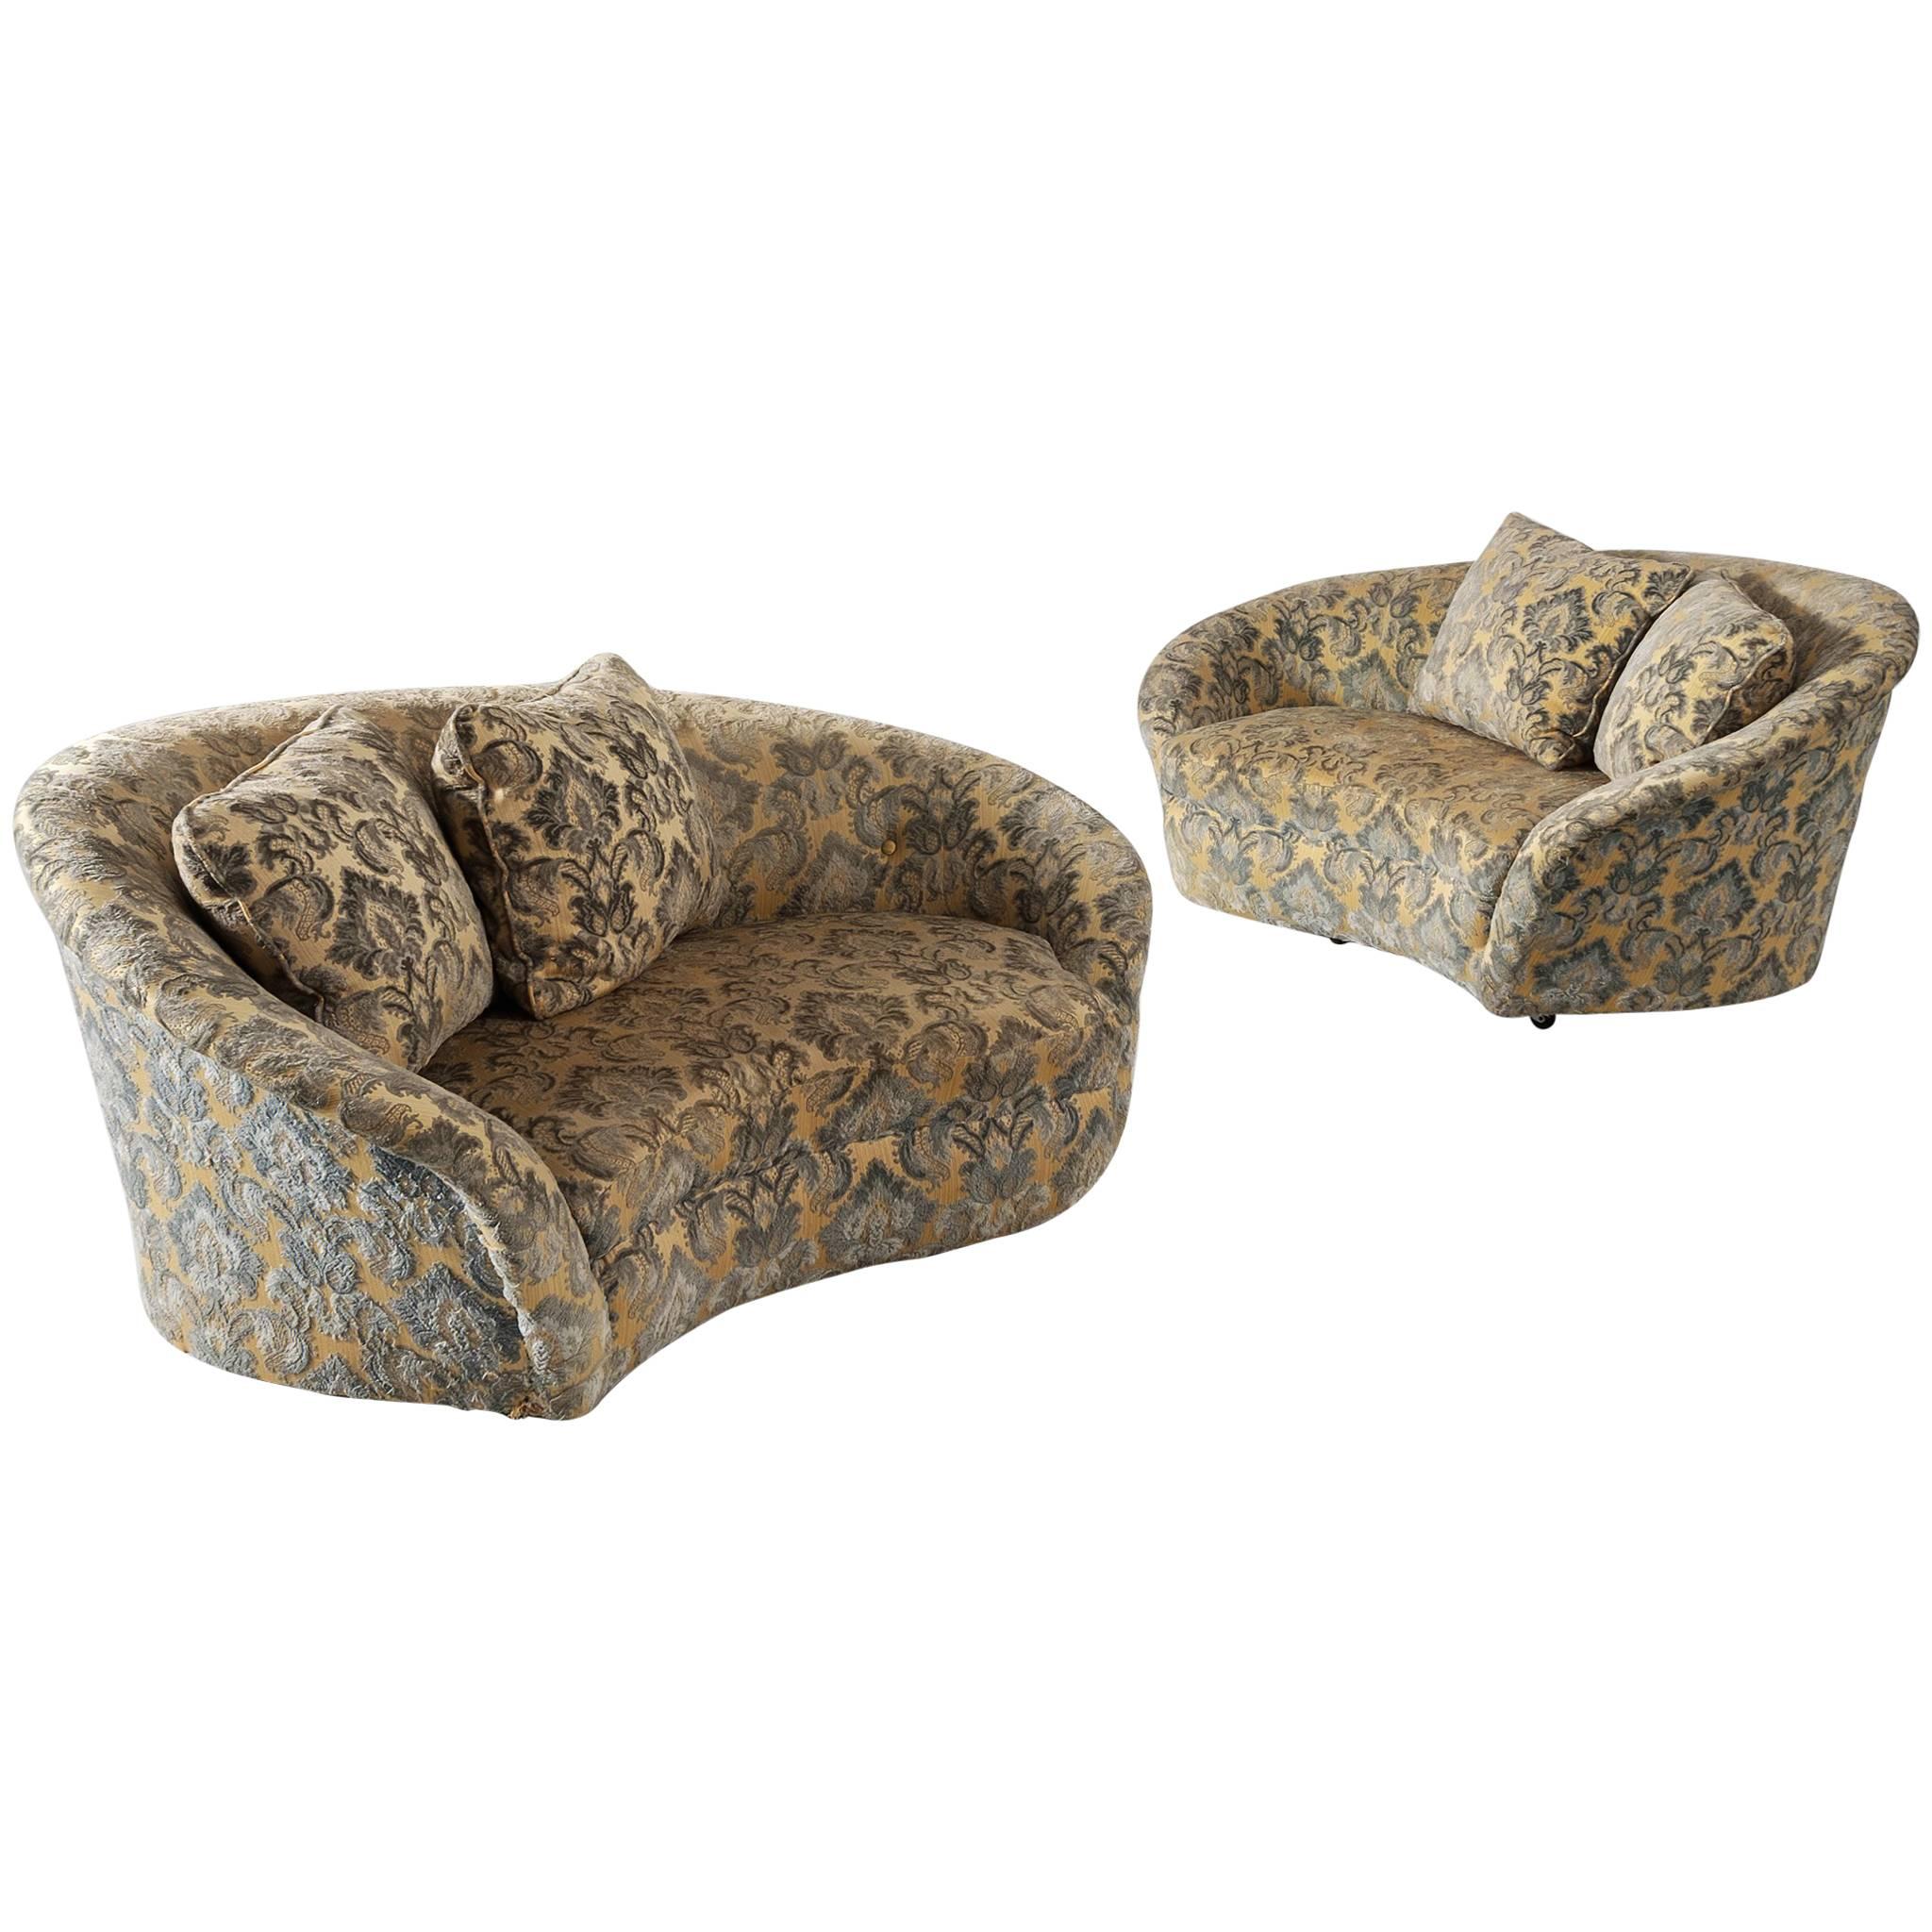 Pair of Italian Settees in Gold Floral Fabric Upholstery